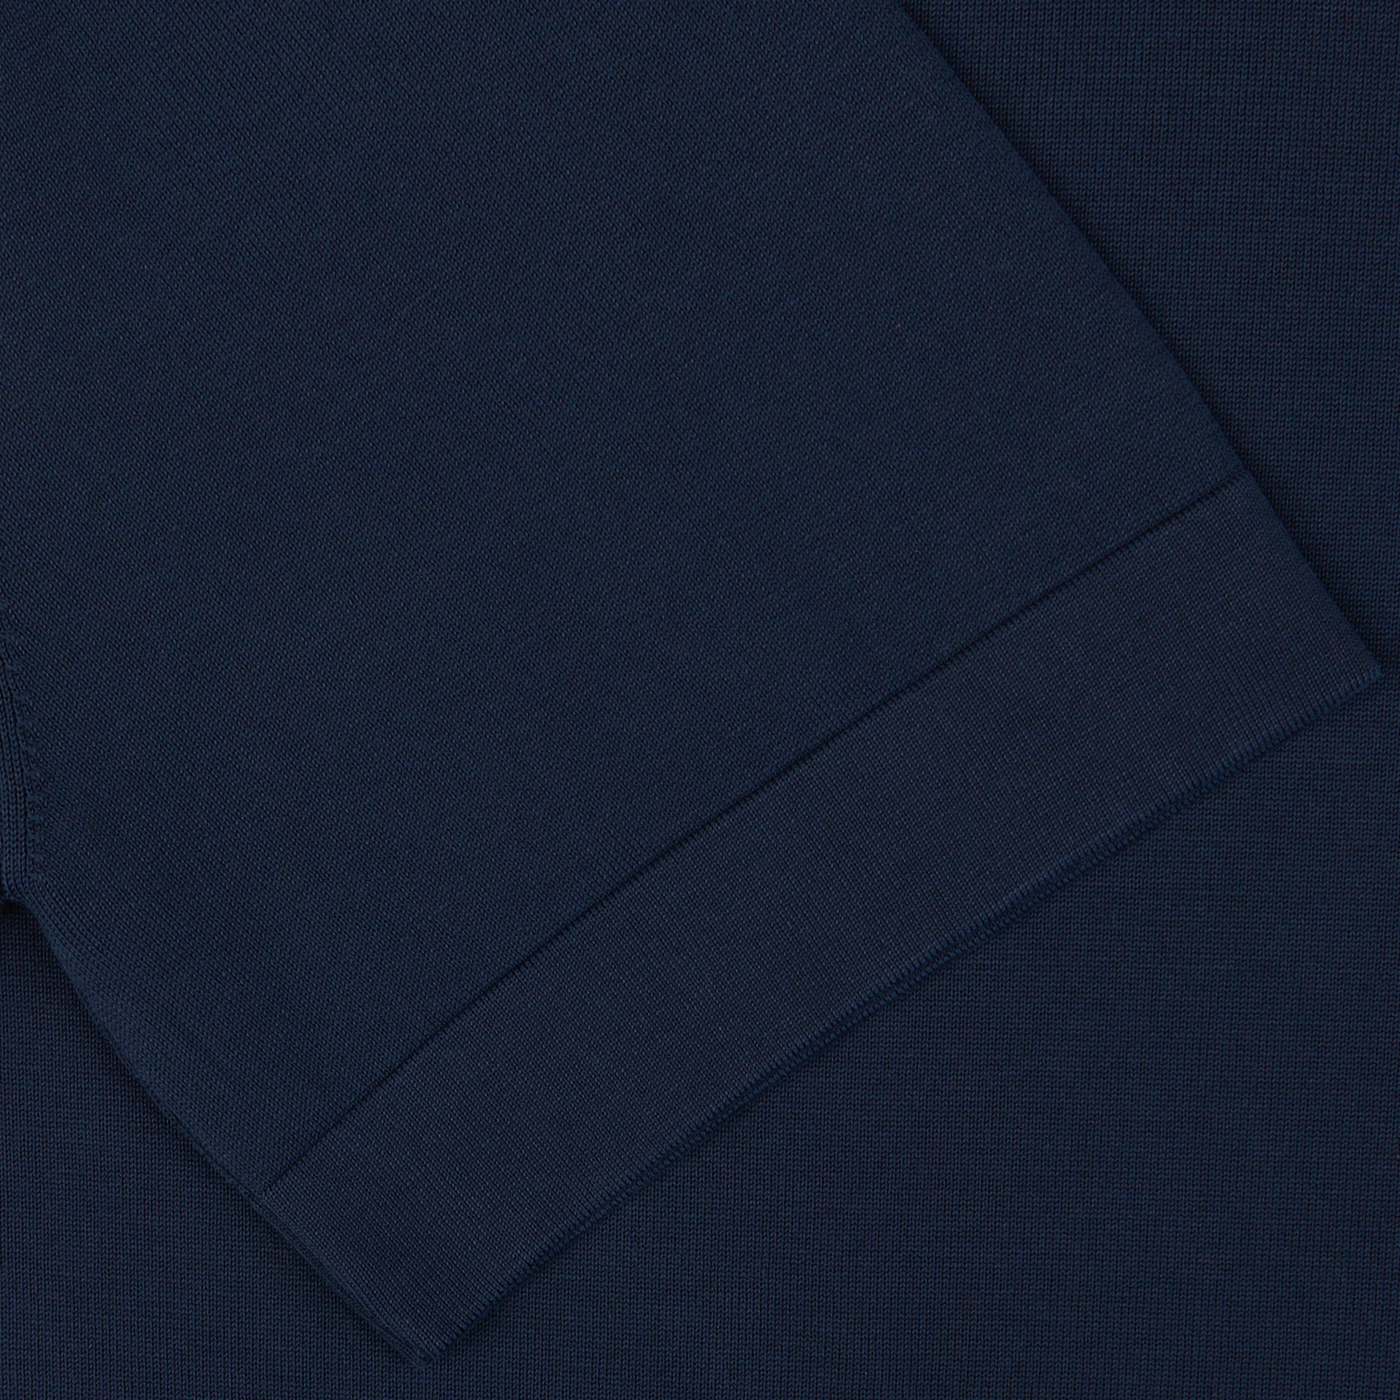 Close-up view of a Gran Sasso navy blue knitted textile with a visible hem seam.